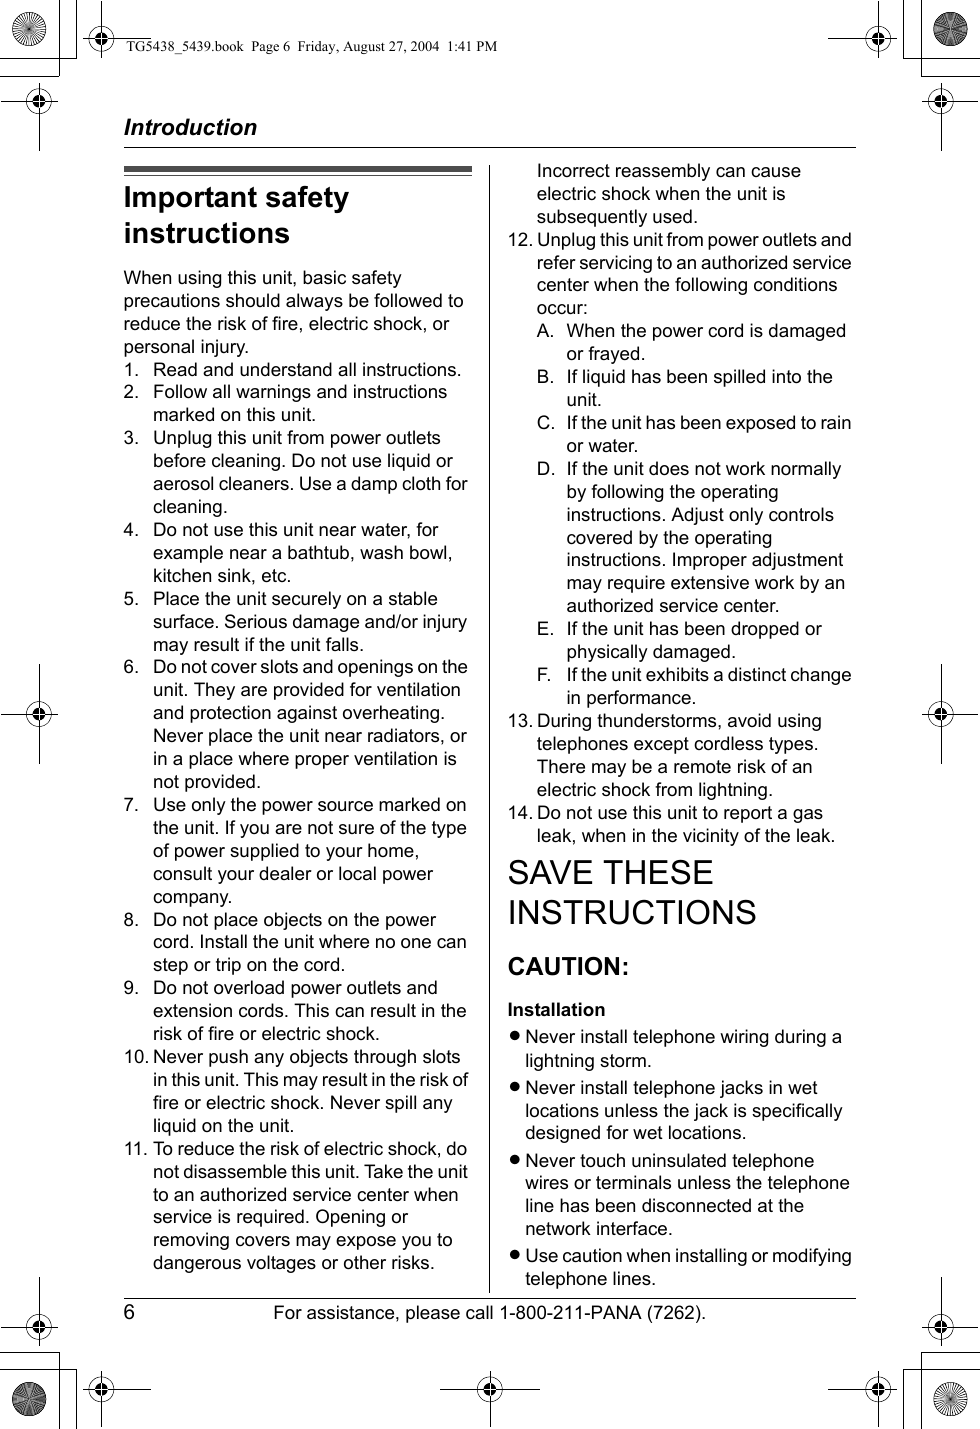 Introduction6For assistance, please call 1-800-211-PANA (7262).Important safety instructionsWhen using this unit, basic safety precautions should always be followed to reduce the risk of fire, electric shock, or personal injury.1. Read and understand all instructions.2. Follow all warnings and instructions marked on this unit.3. Unplug this unit from power outlets before cleaning. Do not use liquid or aerosol cleaners. Use a damp cloth for cleaning.4. Do not use this unit near water, for example near a bathtub, wash bowl, kitchen sink, etc.5. Place the unit securely on a stable surface. Serious damage and/or injury may result if the unit falls.6. Do not cover slots and openings on the unit. They are provided for ventilation and protection against overheating. Never place the unit near radiators, or in a place where proper ventilation is not provided.7. Use only the power source marked on the unit. If you are not sure of the type of power supplied to your home, consult your dealer or local power company.8. Do not place objects on the power cord. Install the unit where no one can step or trip on the cord.9. Do not overload power outlets and extension cords. This can result in the risk of fire or electric shock.10. Never push any objects through slots in this unit. This may result in the risk of fire or electric shock. Never spill any liquid on the unit.11. To reduce the risk of electric shock, do not disassemble this unit. Take the unit to an authorized service center when service is required. Opening or removing covers may expose you to dangerous voltages or other risks. Incorrect reassembly can cause electric shock when the unit is subsequently used.12. Unplug this unit from power outlets and refer servicing to an authorized service center when the following conditions occur:A. When the power cord is damaged or frayed.B. If liquid has been spilled into the unit.C. If the unit has been exposed to rain or water.D. If the unit does not work normally by following the operating instructions. Adjust only controls covered by the operating instructions. Improper adjustment may require extensive work by an authorized service center.E. If the unit has been dropped or physically damaged.F. If the unit exhibits a distinct change in performance.13. During thunderstorms, avoid using telephones except cordless types. There may be a remote risk of an electric shock from lightning.14. Do not use this unit to report a gas leak, when in the vicinity of the leak.SAVE THESE INSTRUCTIONSCAUTION:InstallationLNever install telephone wiring during a lightning storm.LNever install telephone jacks in wet locations unless the jack is specifically designed for wet locations.LNever touch uninsulated telephone wires or terminals unless the telephone line has been disconnected at the network interface.LUse caution when installing or modifying telephone lines.TG5438_5439.book  Page 6  Friday, August 27, 2004  1:41 PM